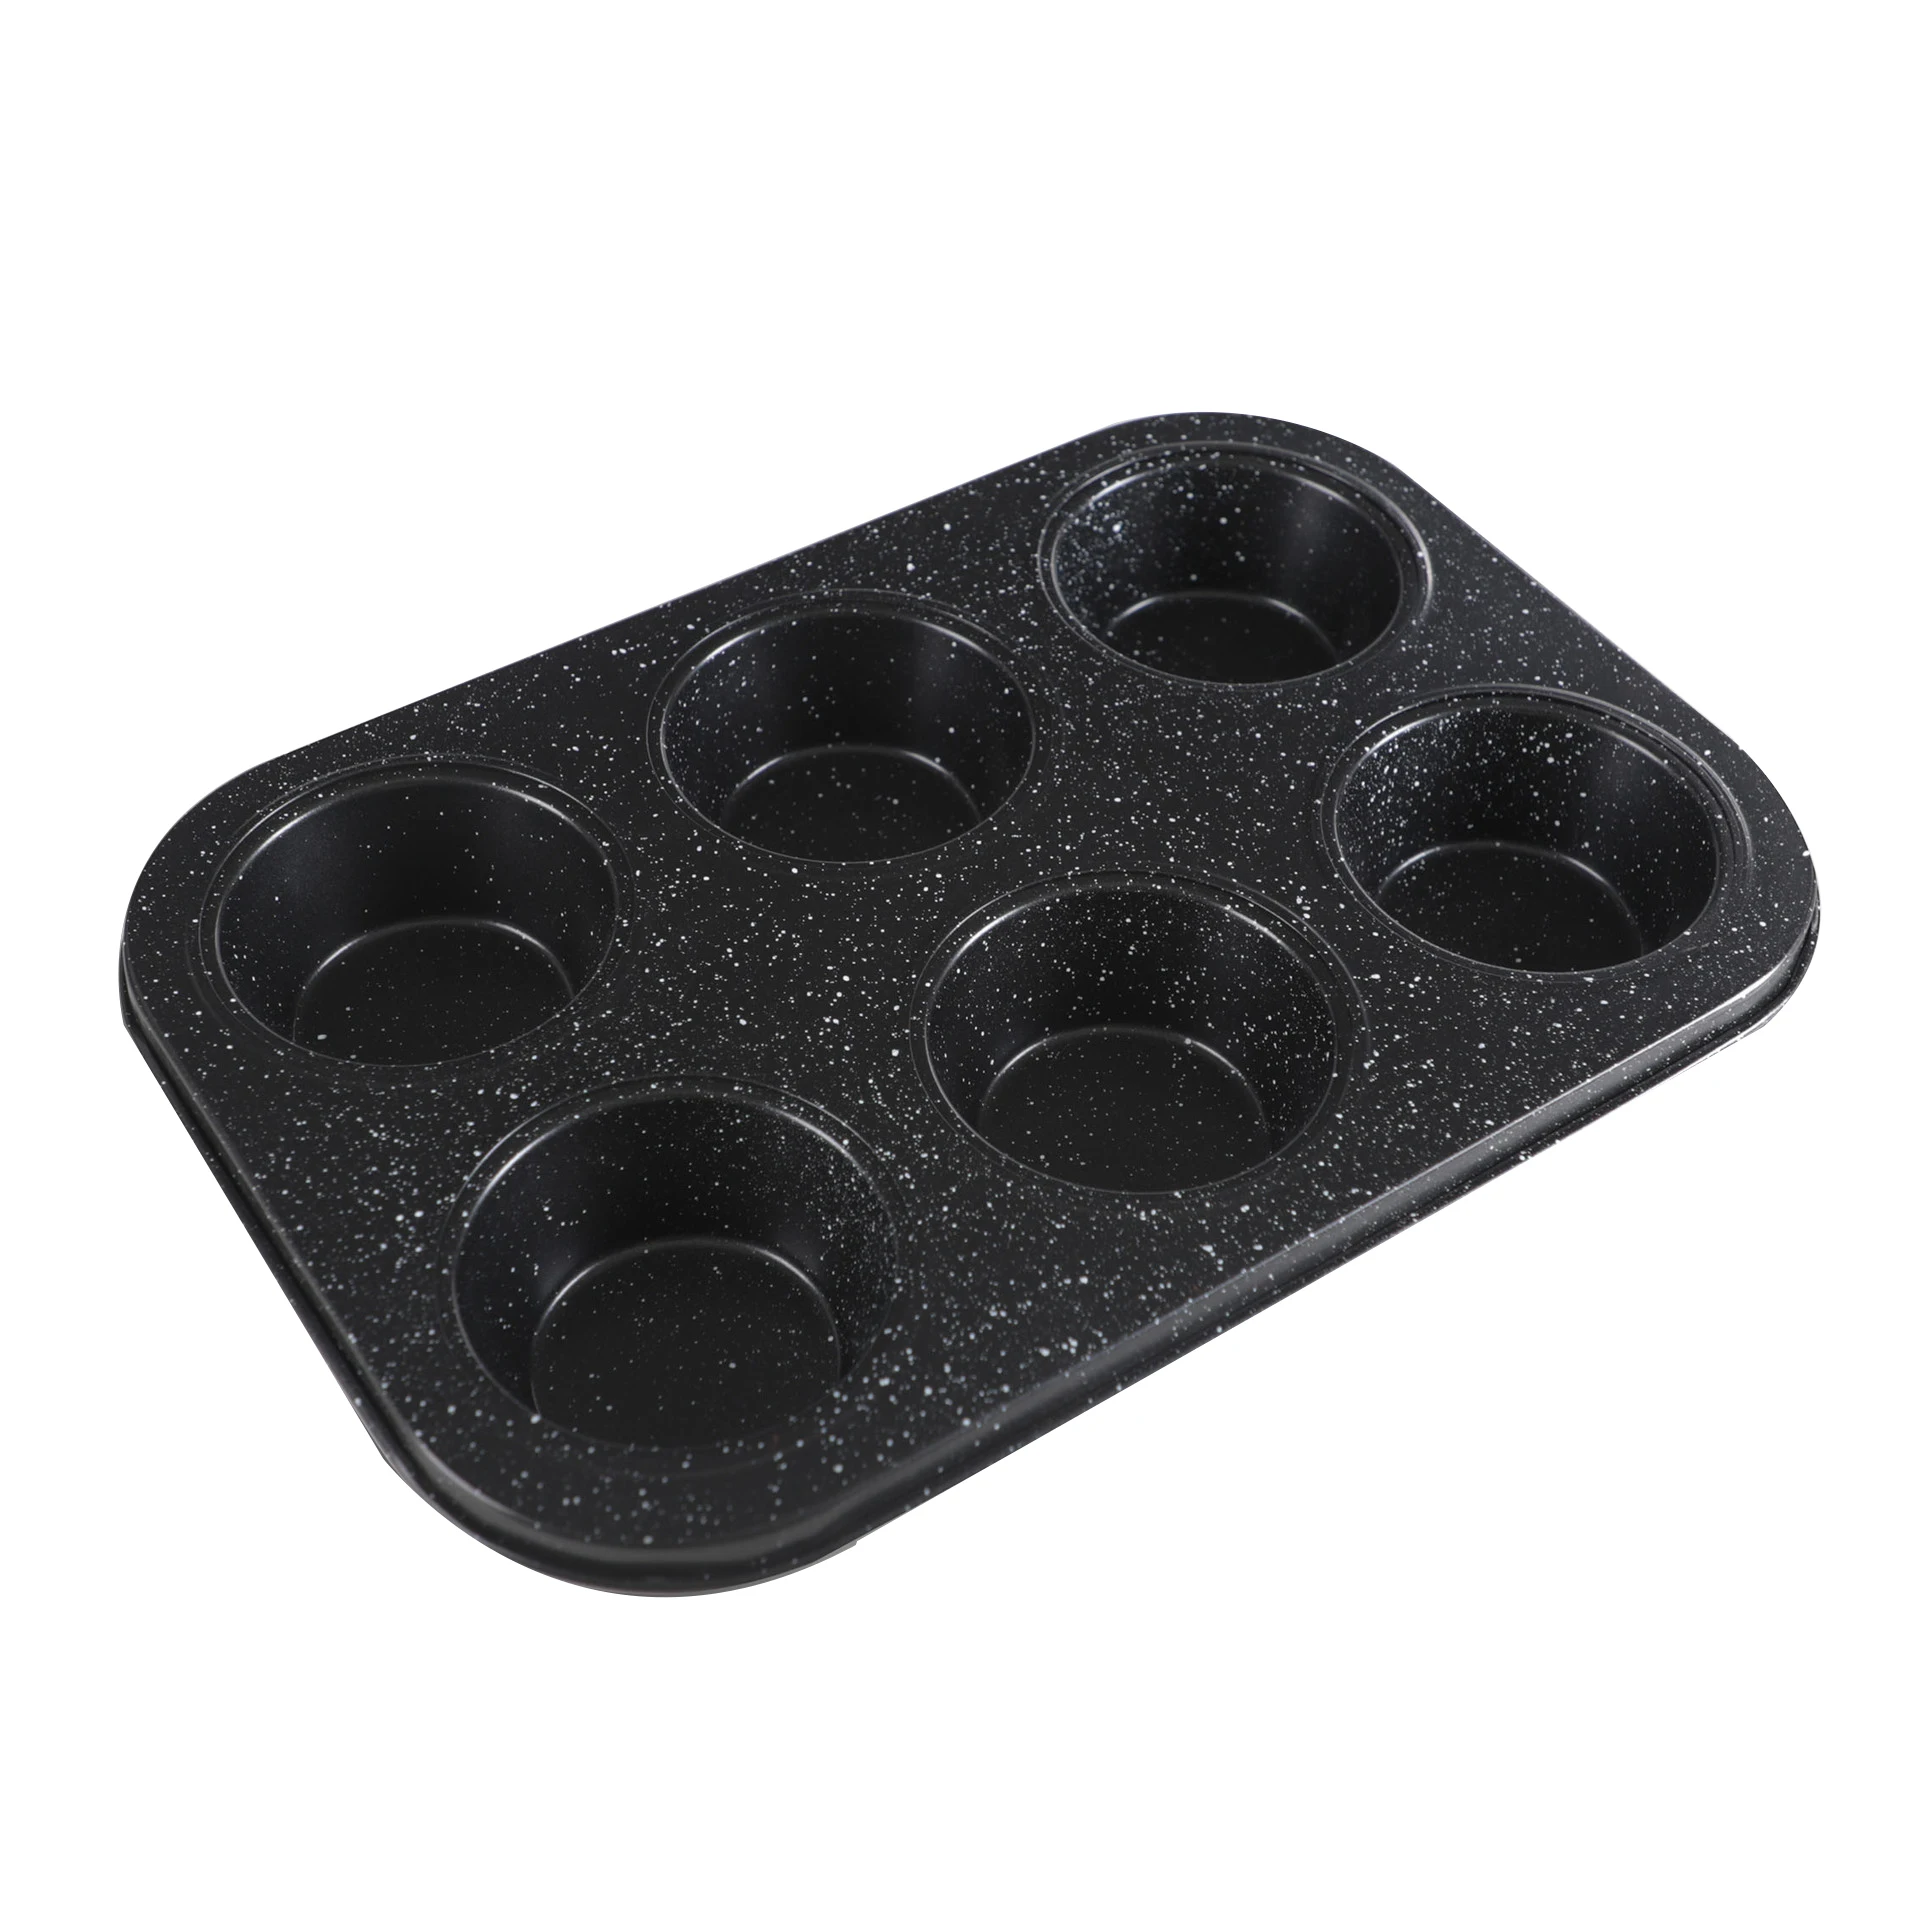 

Custom Non Stick Heat Resistant Baking Mold Sprinkled Black 6 Hole Carbon Steel Cupcake Mold Muffin Baking Pan, Black spinkle